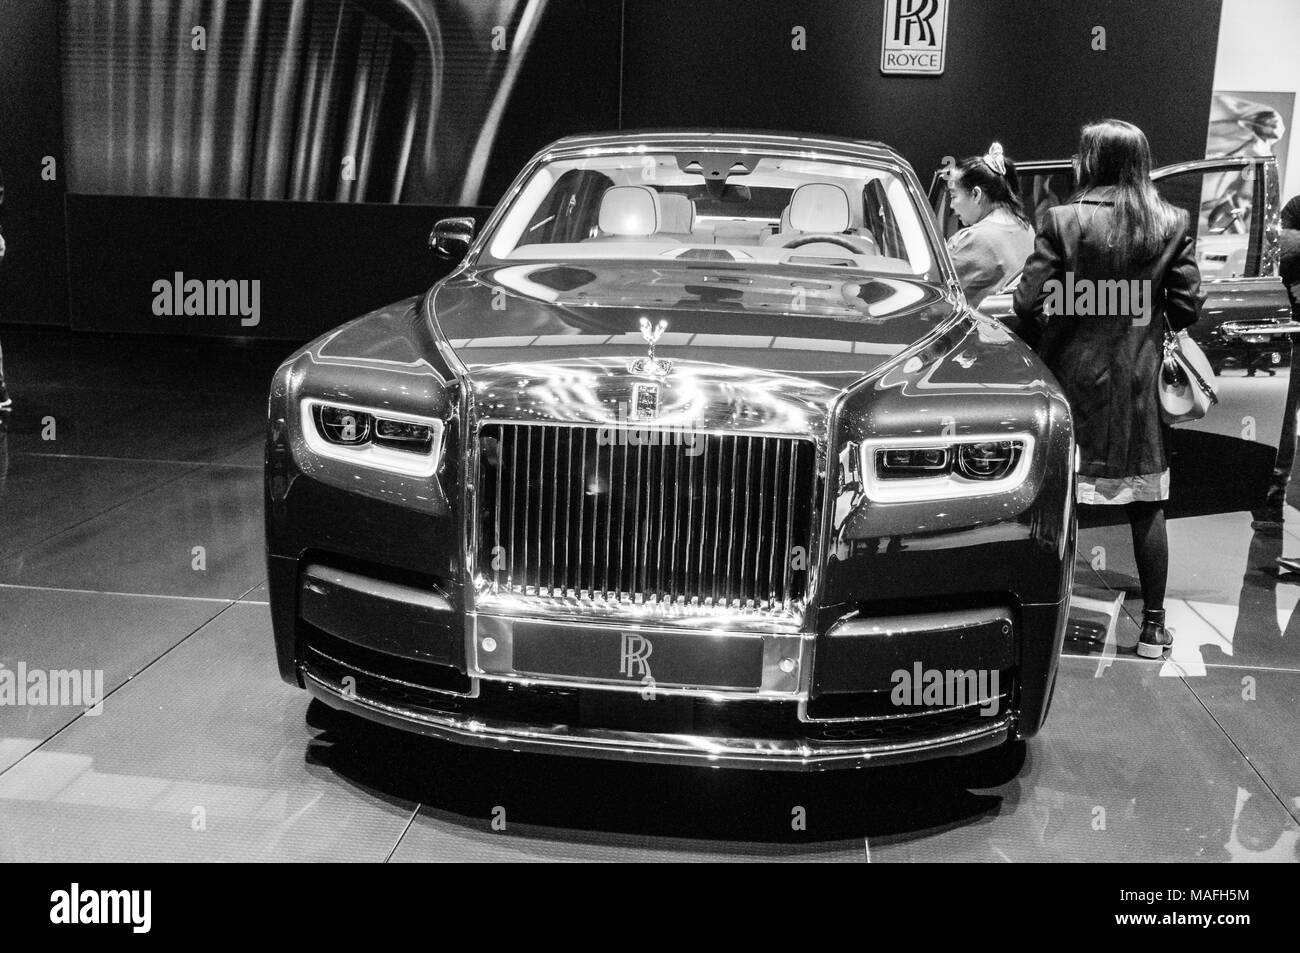 Page 2 - Rolls Geneva Royce Switzerland High Resolution Stock Photography  and Images - Alamy